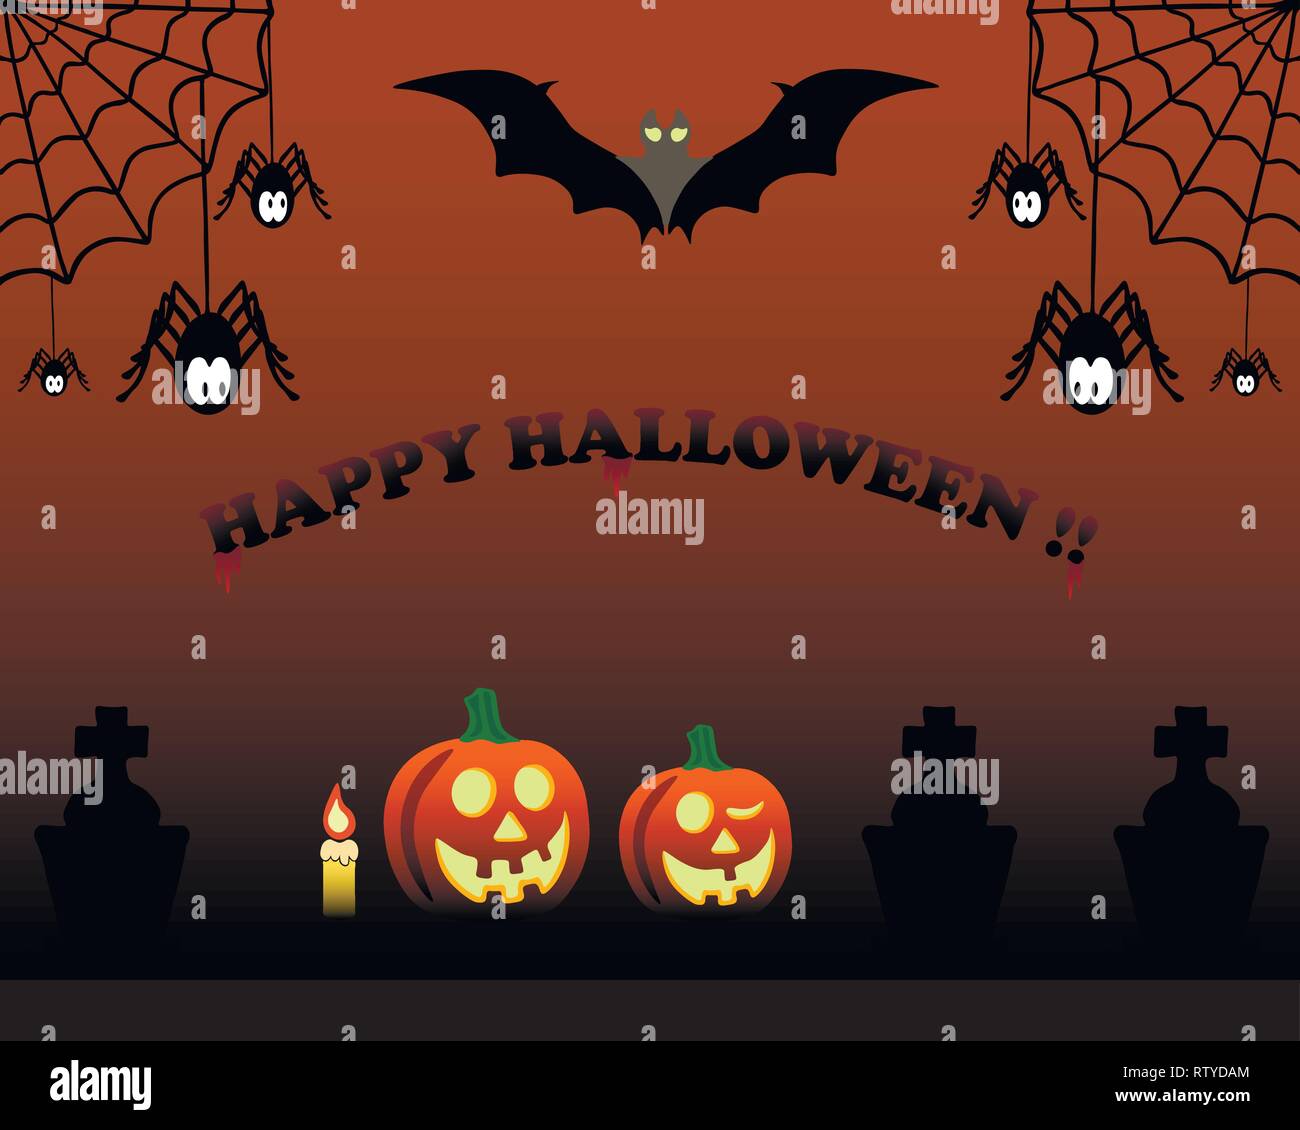 Halloween night background with graves, pumpkins, spiders and bat. Stock Vector